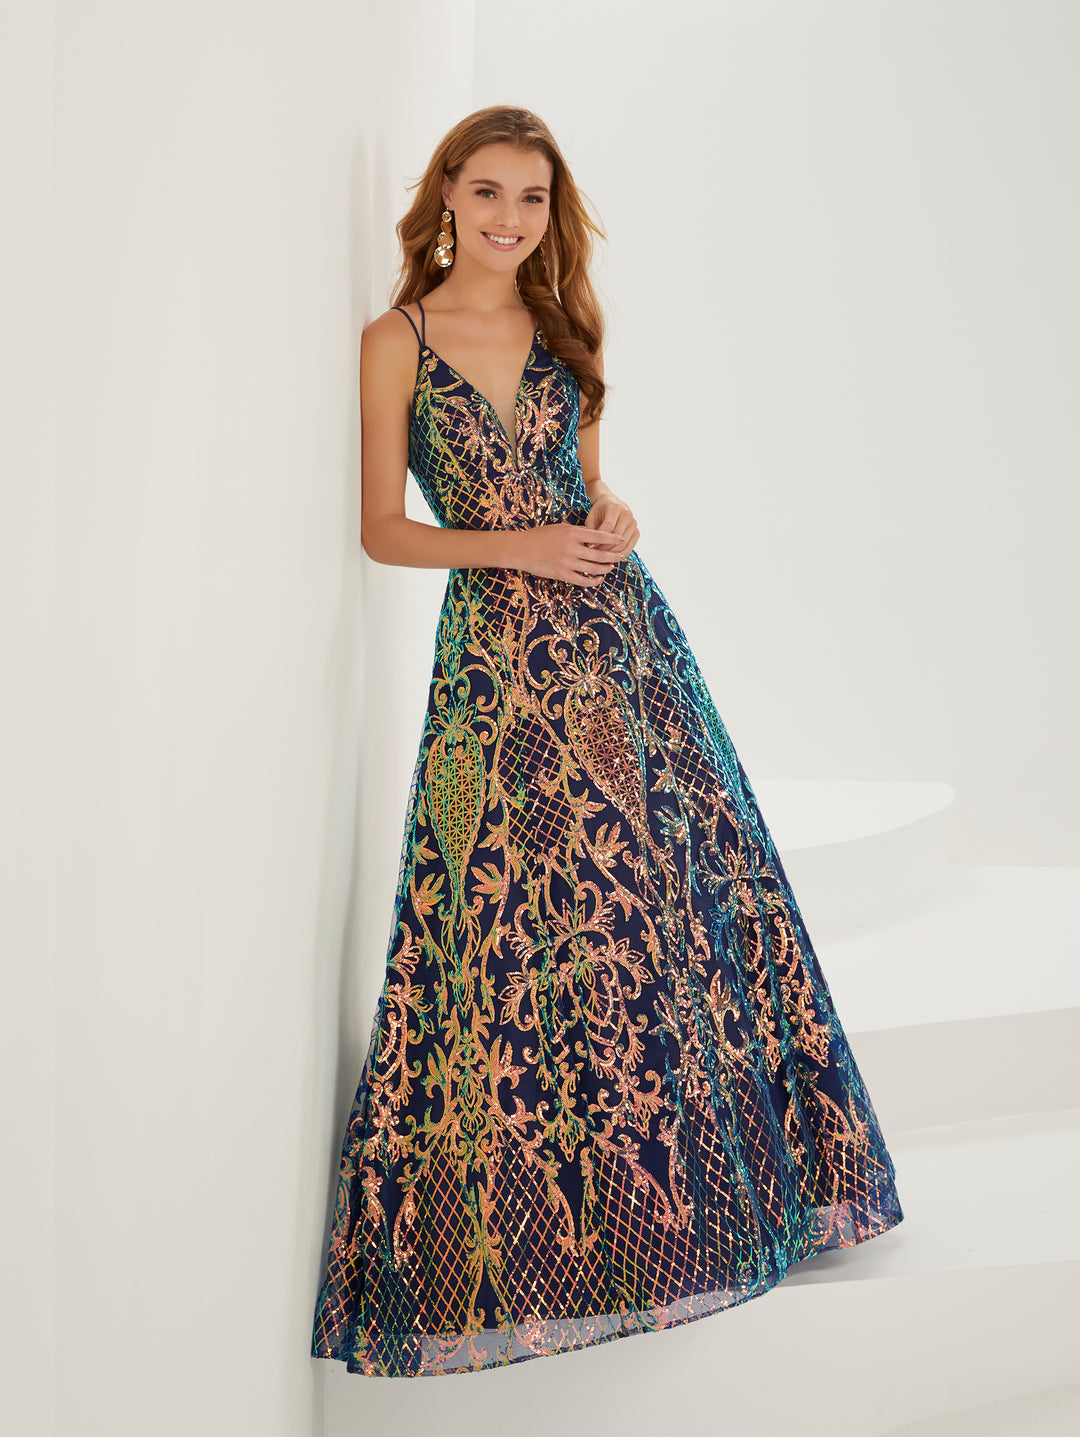 Sequin Print Illusion V-Neck Gown by Tiffany Designs 16951